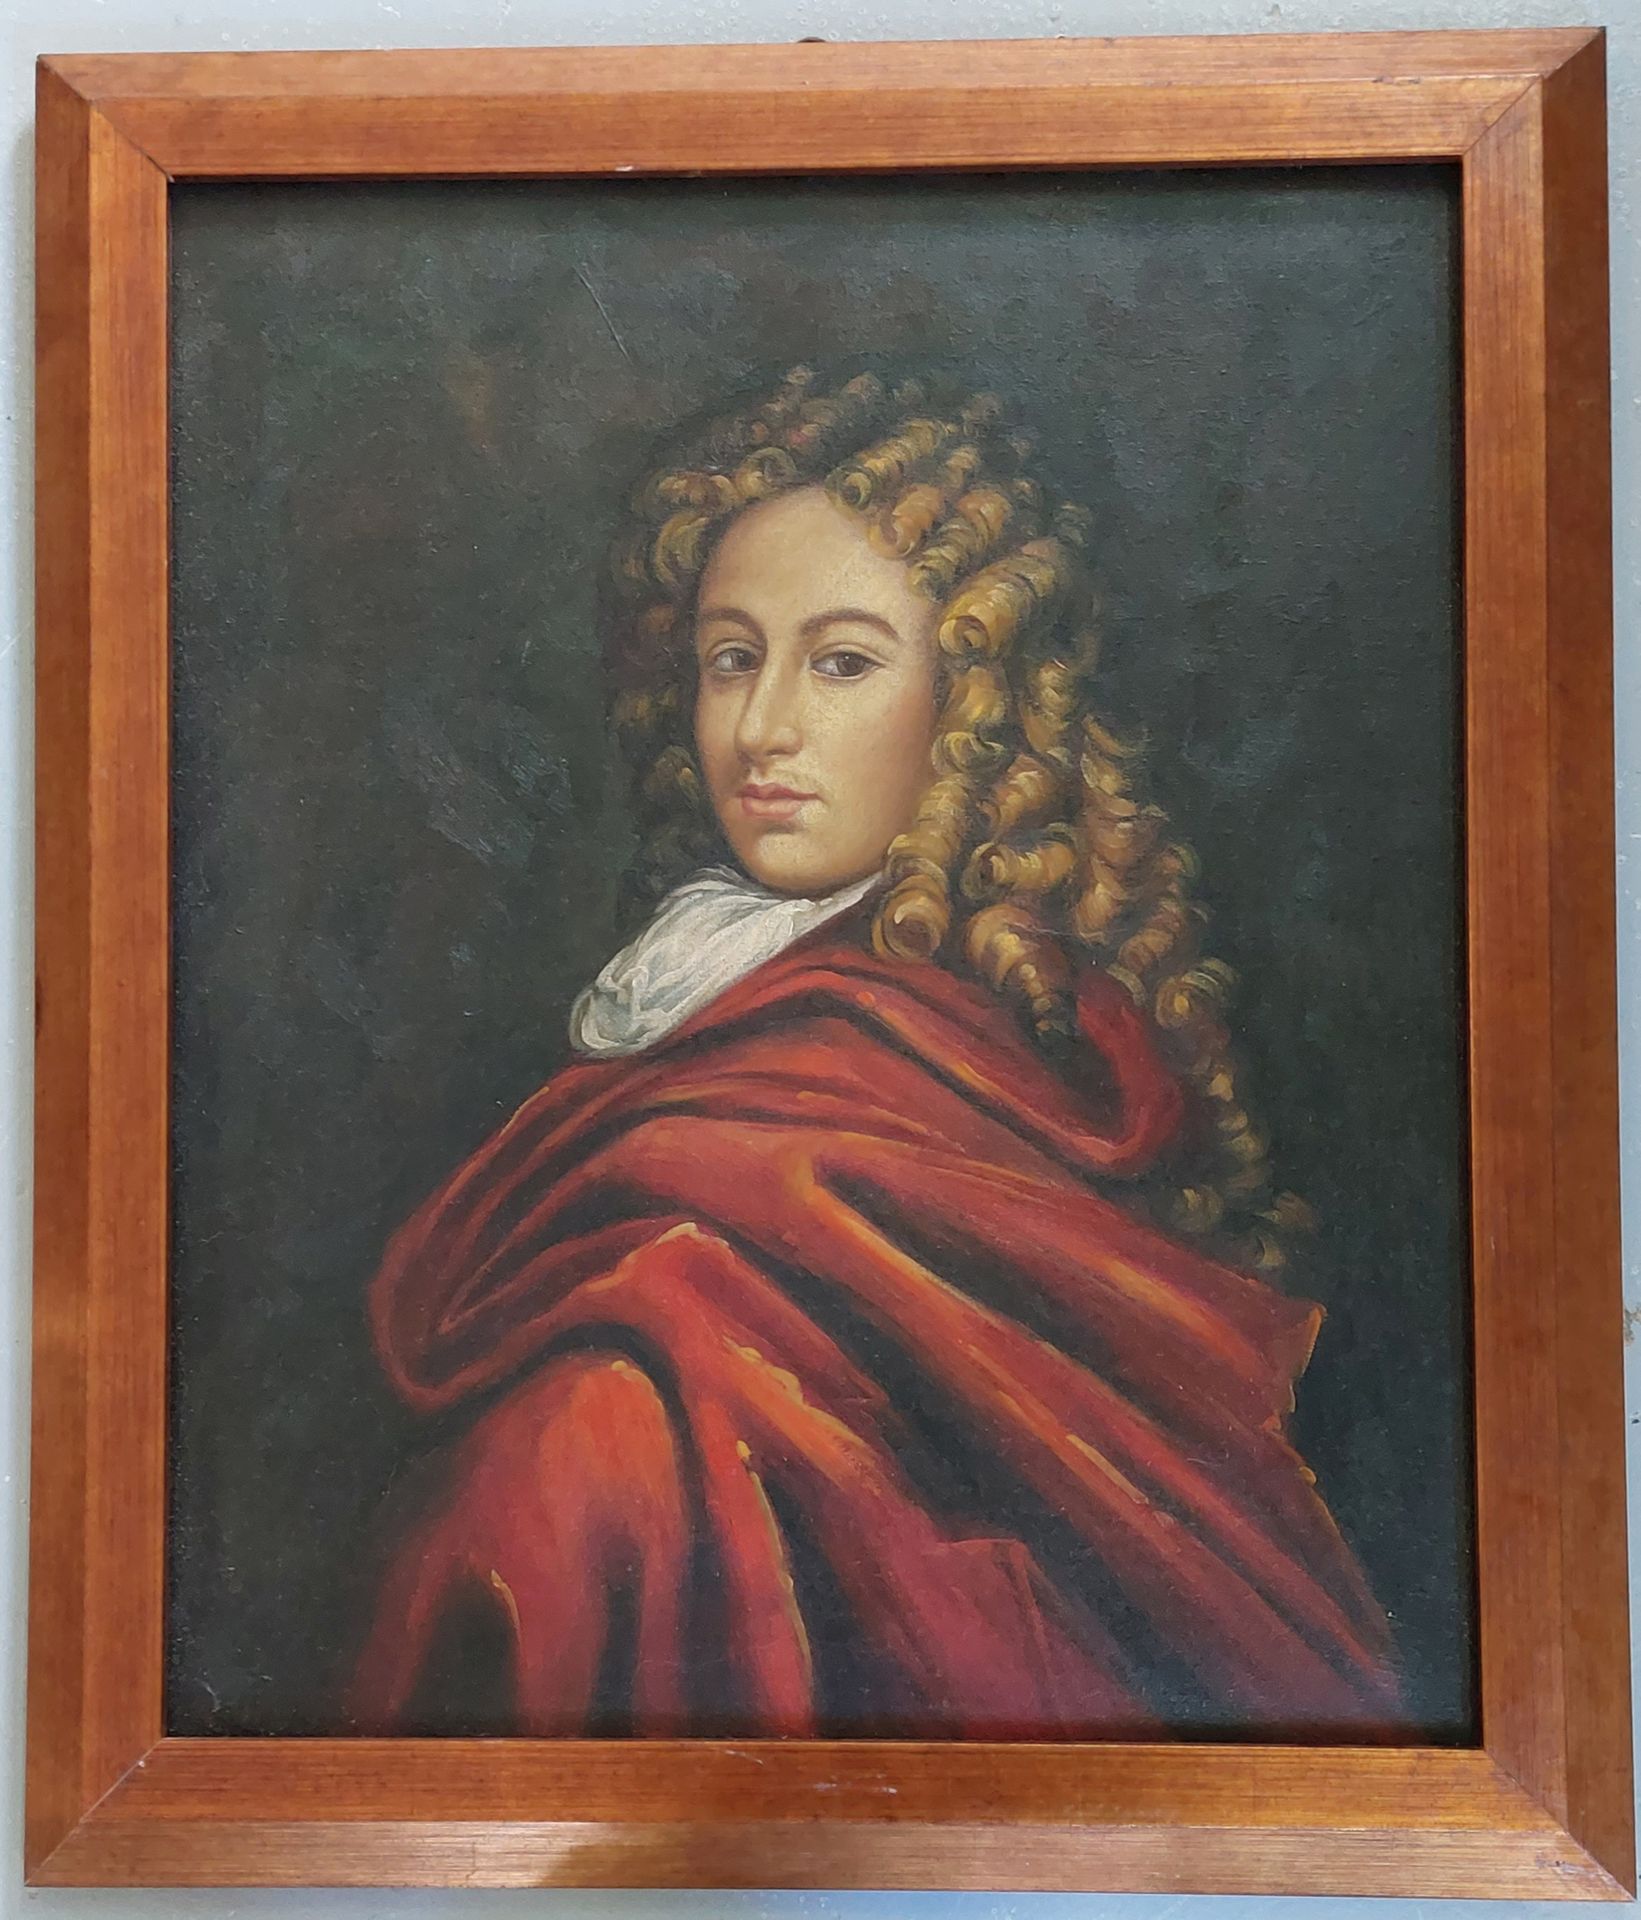 Null IN THE TASTE OF THE EIGHTEENTH CENTURY

Portrait of a man with a red cape

&hellip;